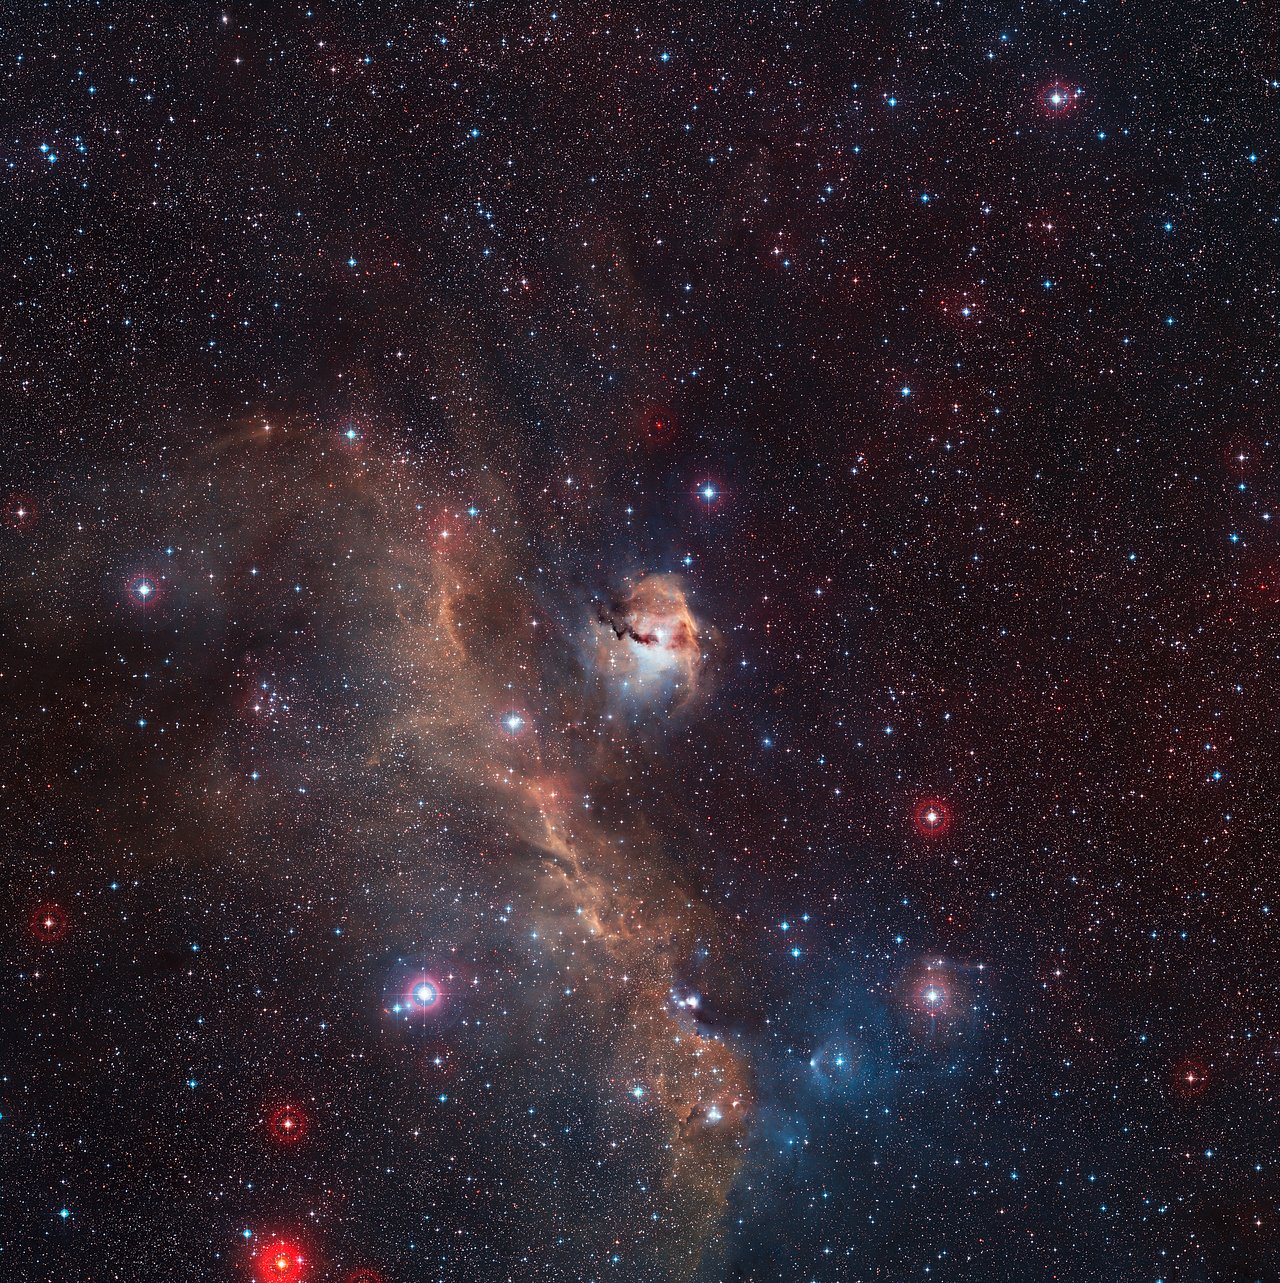 This wide-field view captures the evocative and colourful star formation region of the Seagull Nebula, IC 2177, on the borders of the constellations of Monoceros (The Unicorn) and Canis Major (The Great Dog). This view was created from images forming part of the Digitized Sky Survey 2. Credit: ESO/Digitized Sky Survey 2. Acknowledgement: Davide De Martin